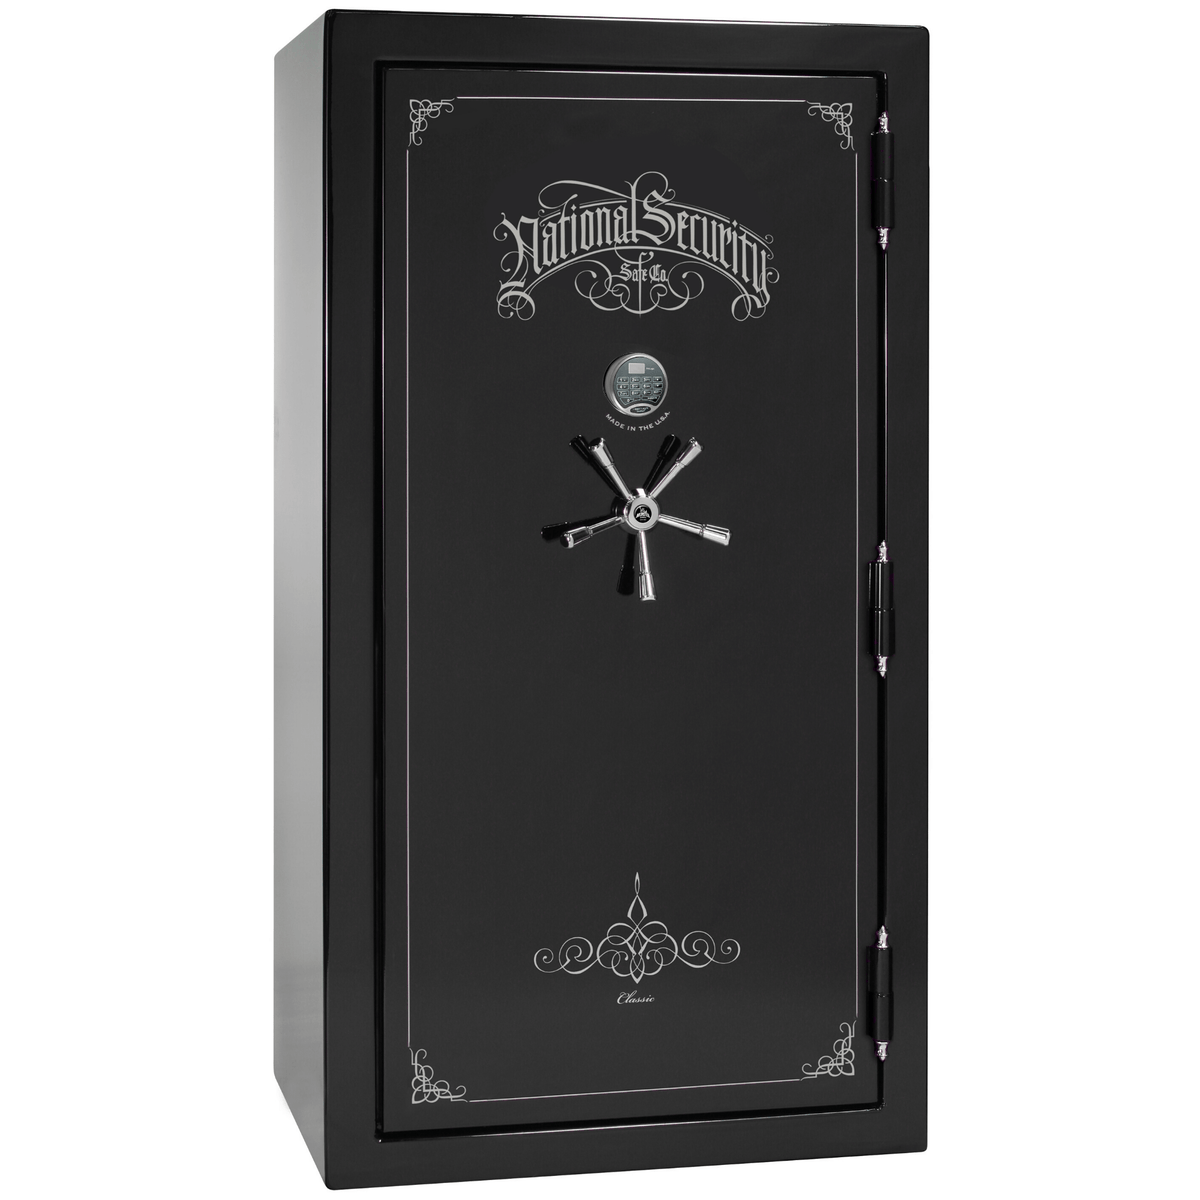 Liberty Safe Classic Plus 40 in Black Gloss with Chrome Electronic Lock, closed door.